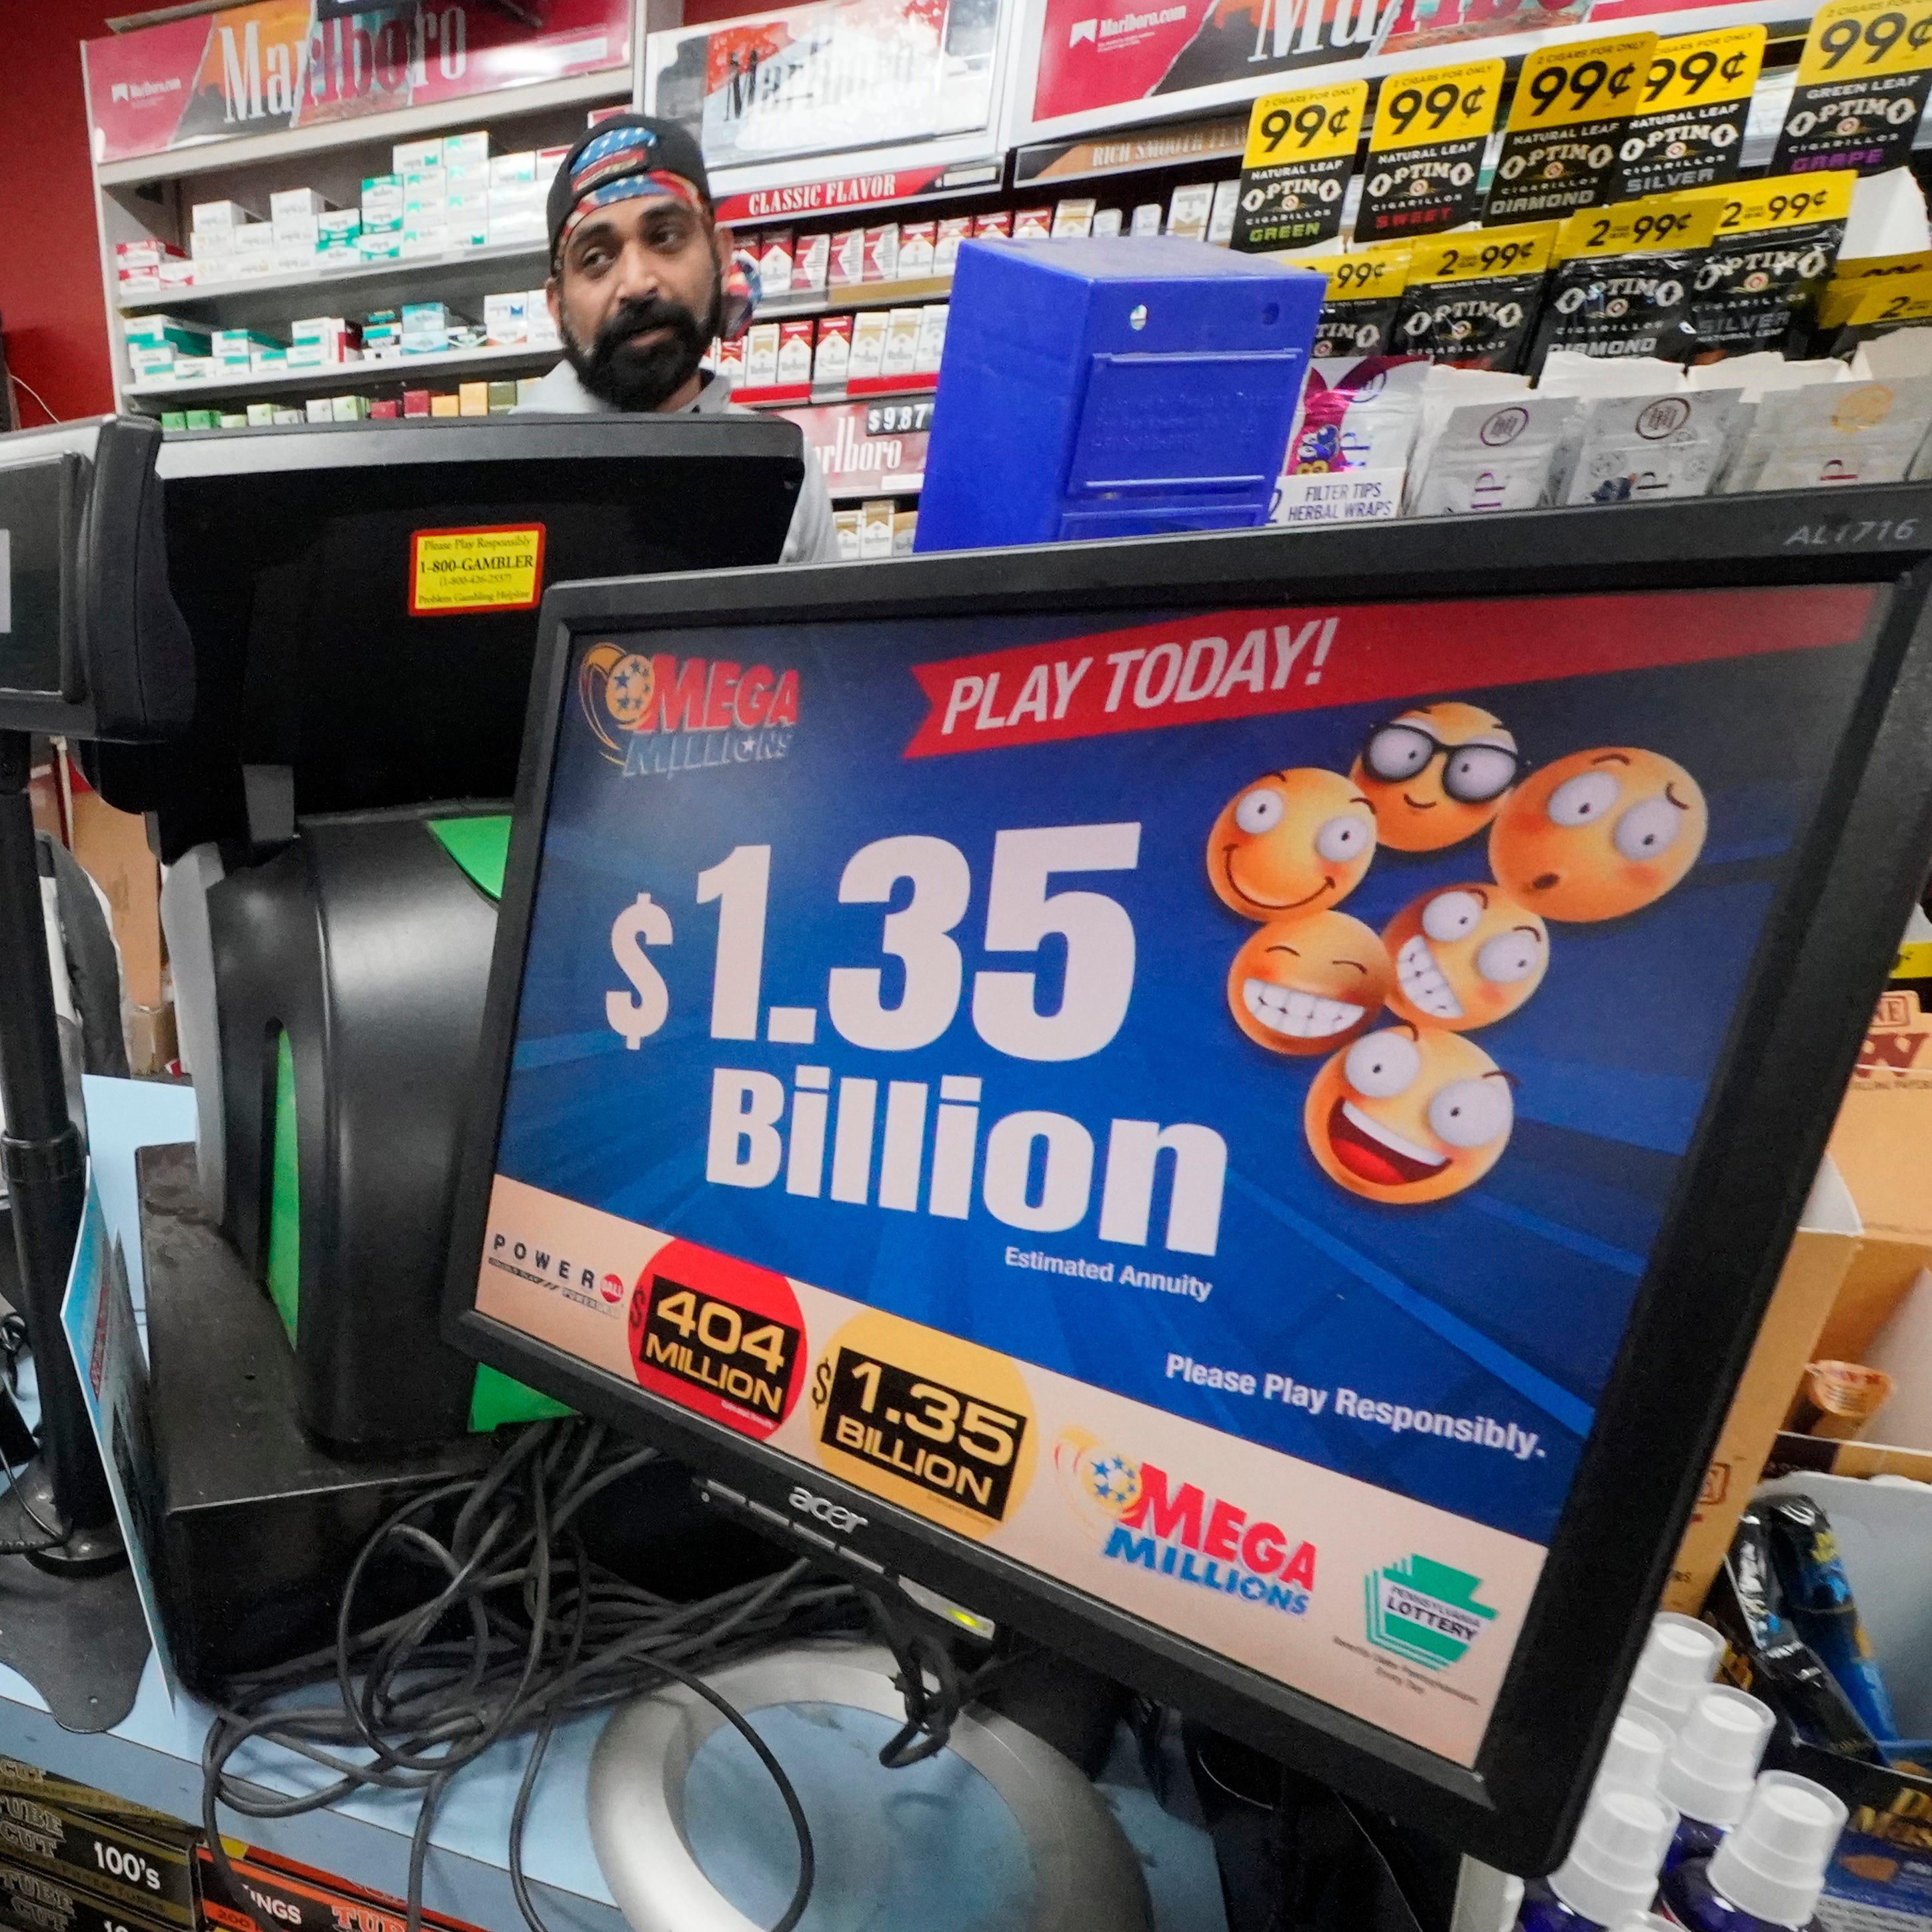 A Mega Million sign displays the estimated jackpot of $1.35 billion at the Cranberry Super Mini Mart in Cranberry, Pennsylvania, on Thursday, Jan. 12, 2023.  A ticket purchased in Maine matched the winning numbers for the lottery's grand prize on Friday, Jan. 13, 2023.